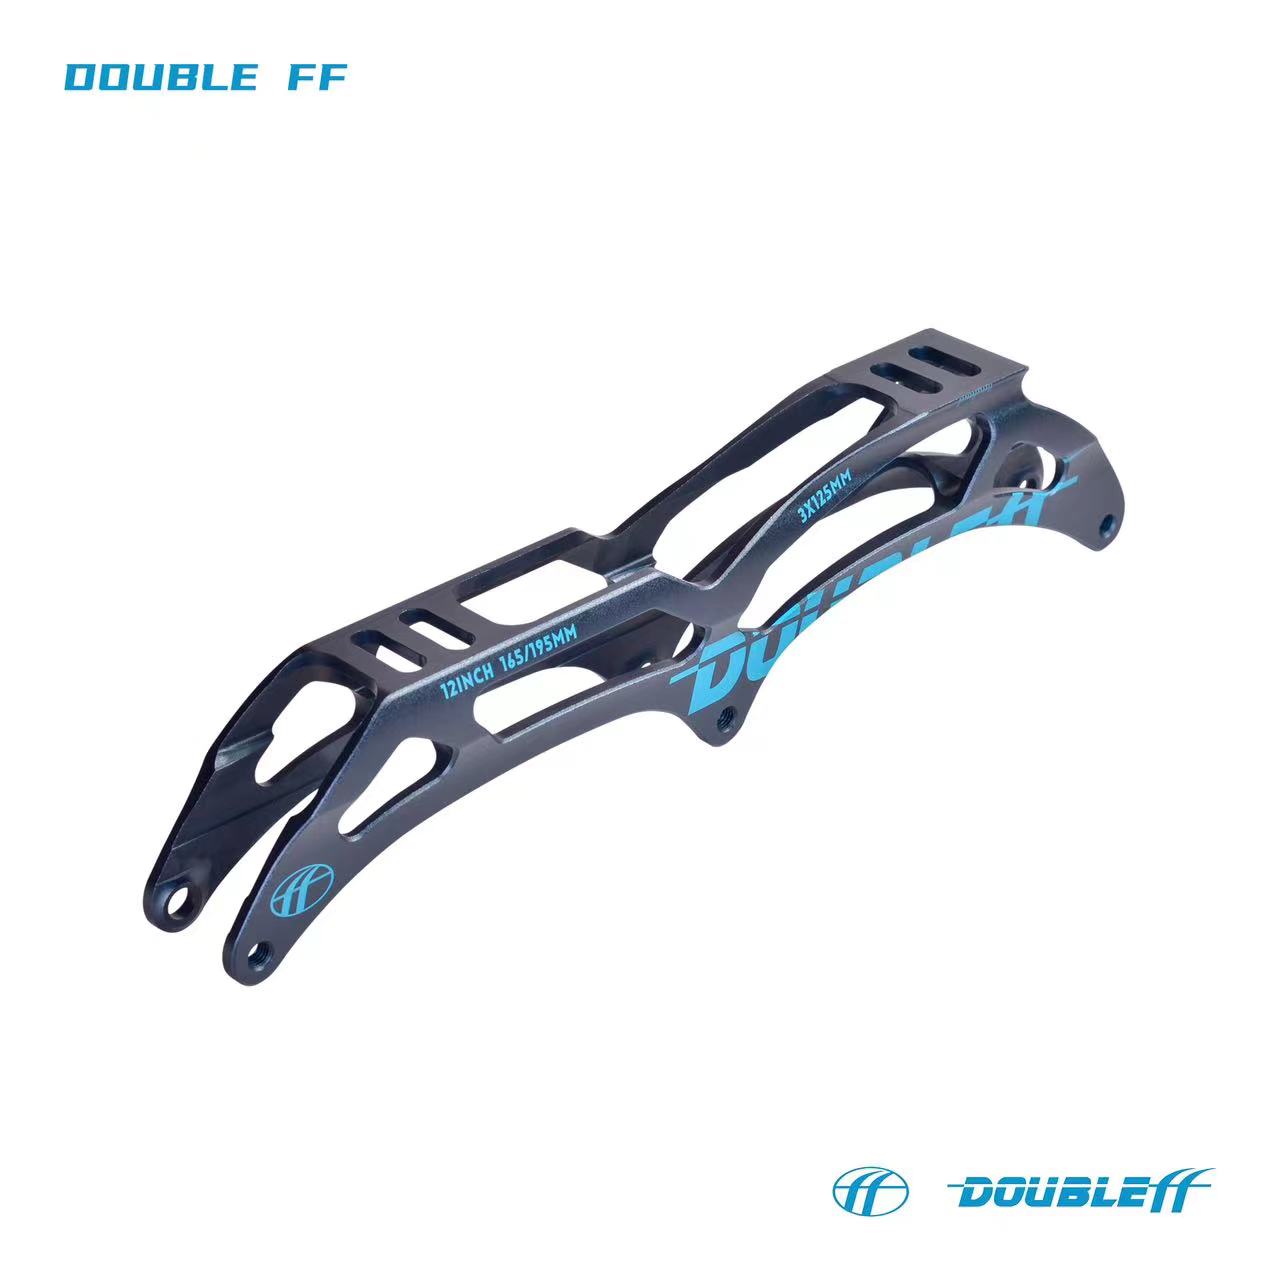 Double FF Speed Skate Frame 7005 Aluminum professional competition Inline Skate Frames